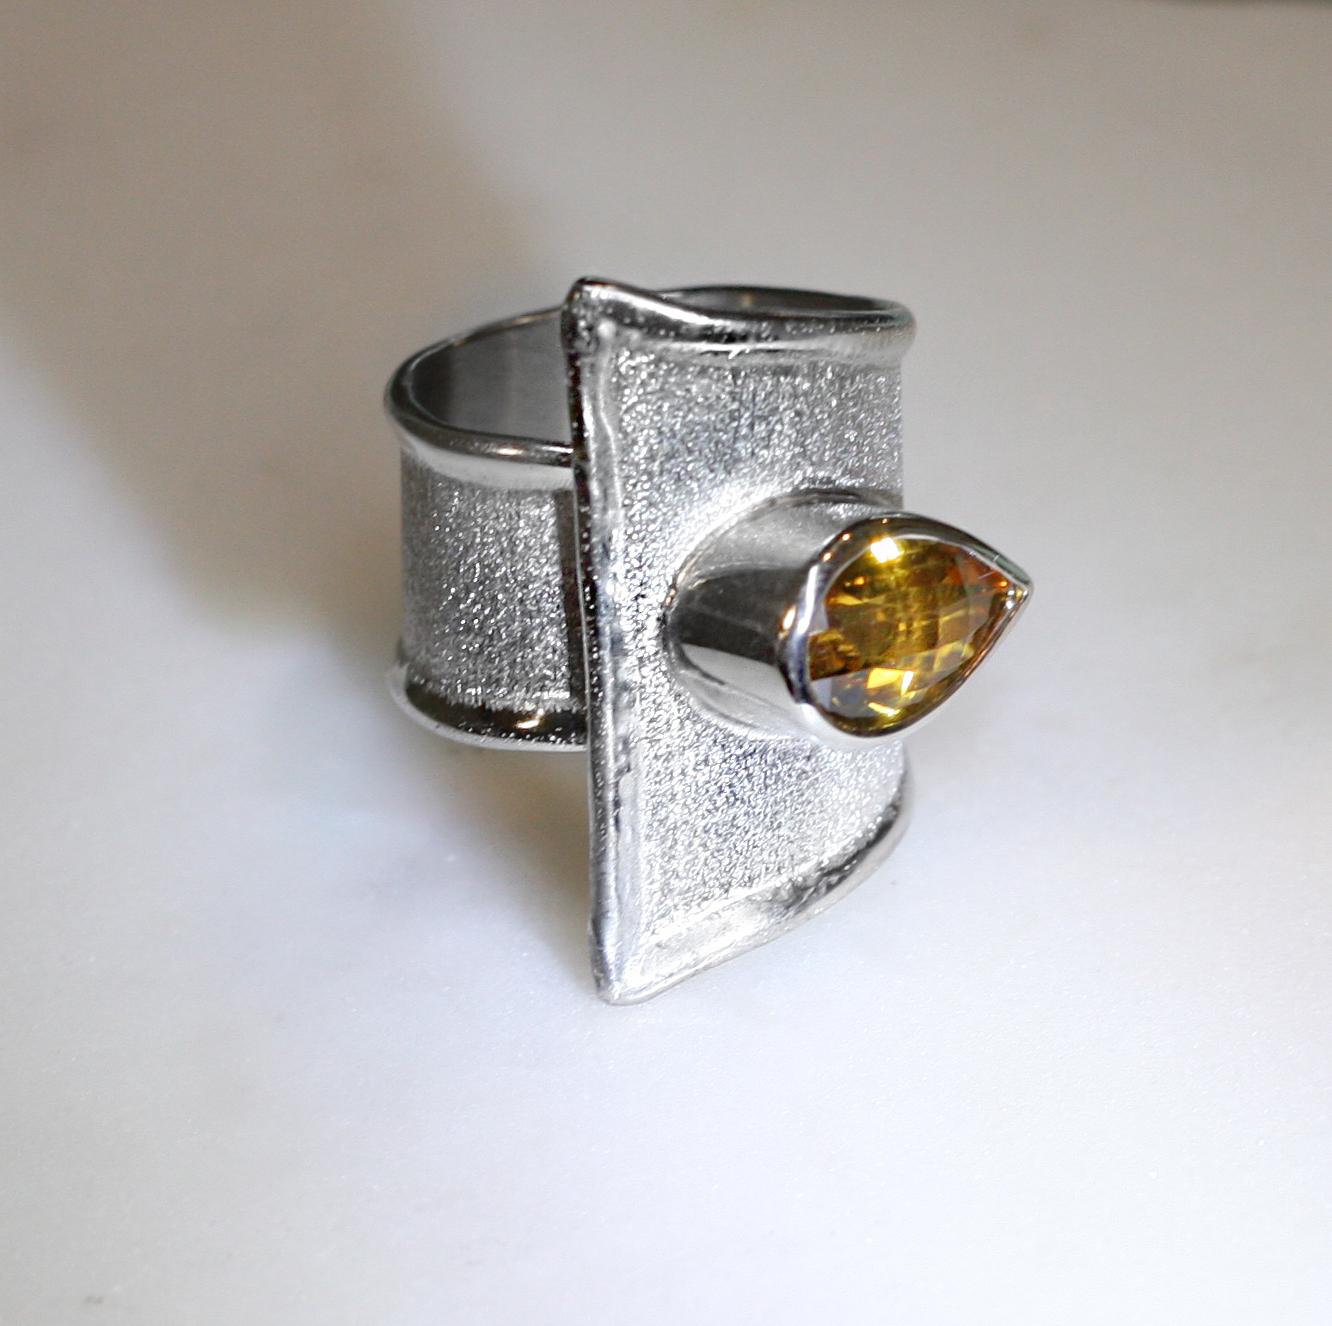 Contemporary Yianni Creations 3.80 Carat Pear Shape Citrine Fine Silver and Palladium Ring